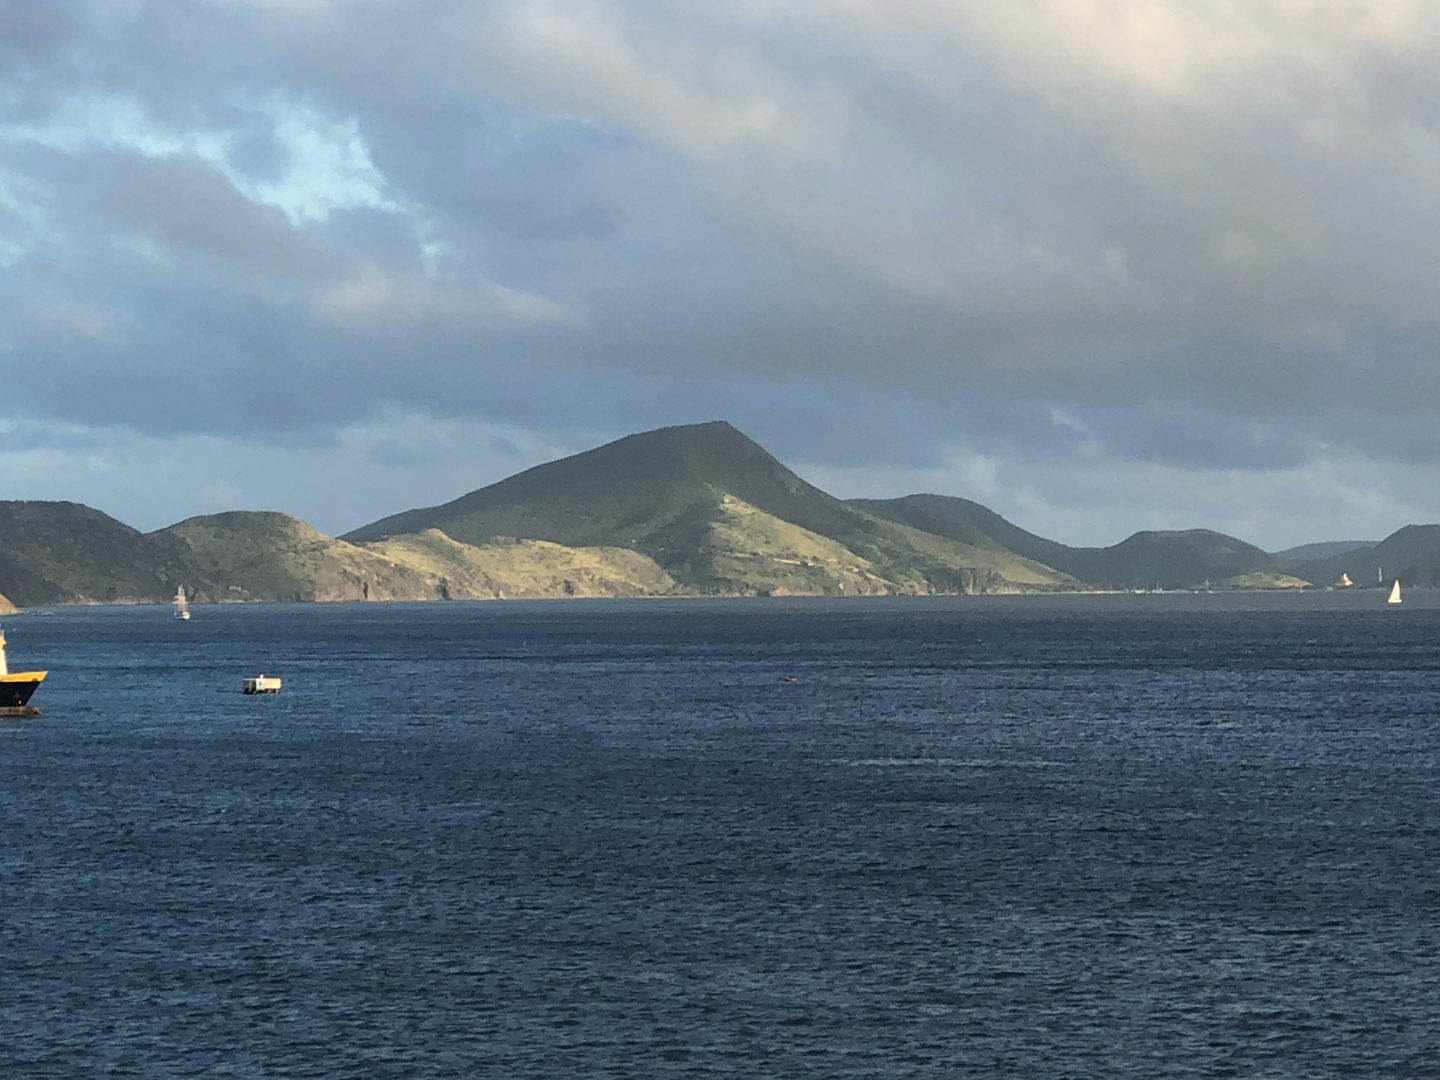 Basseterre—view from the ship.